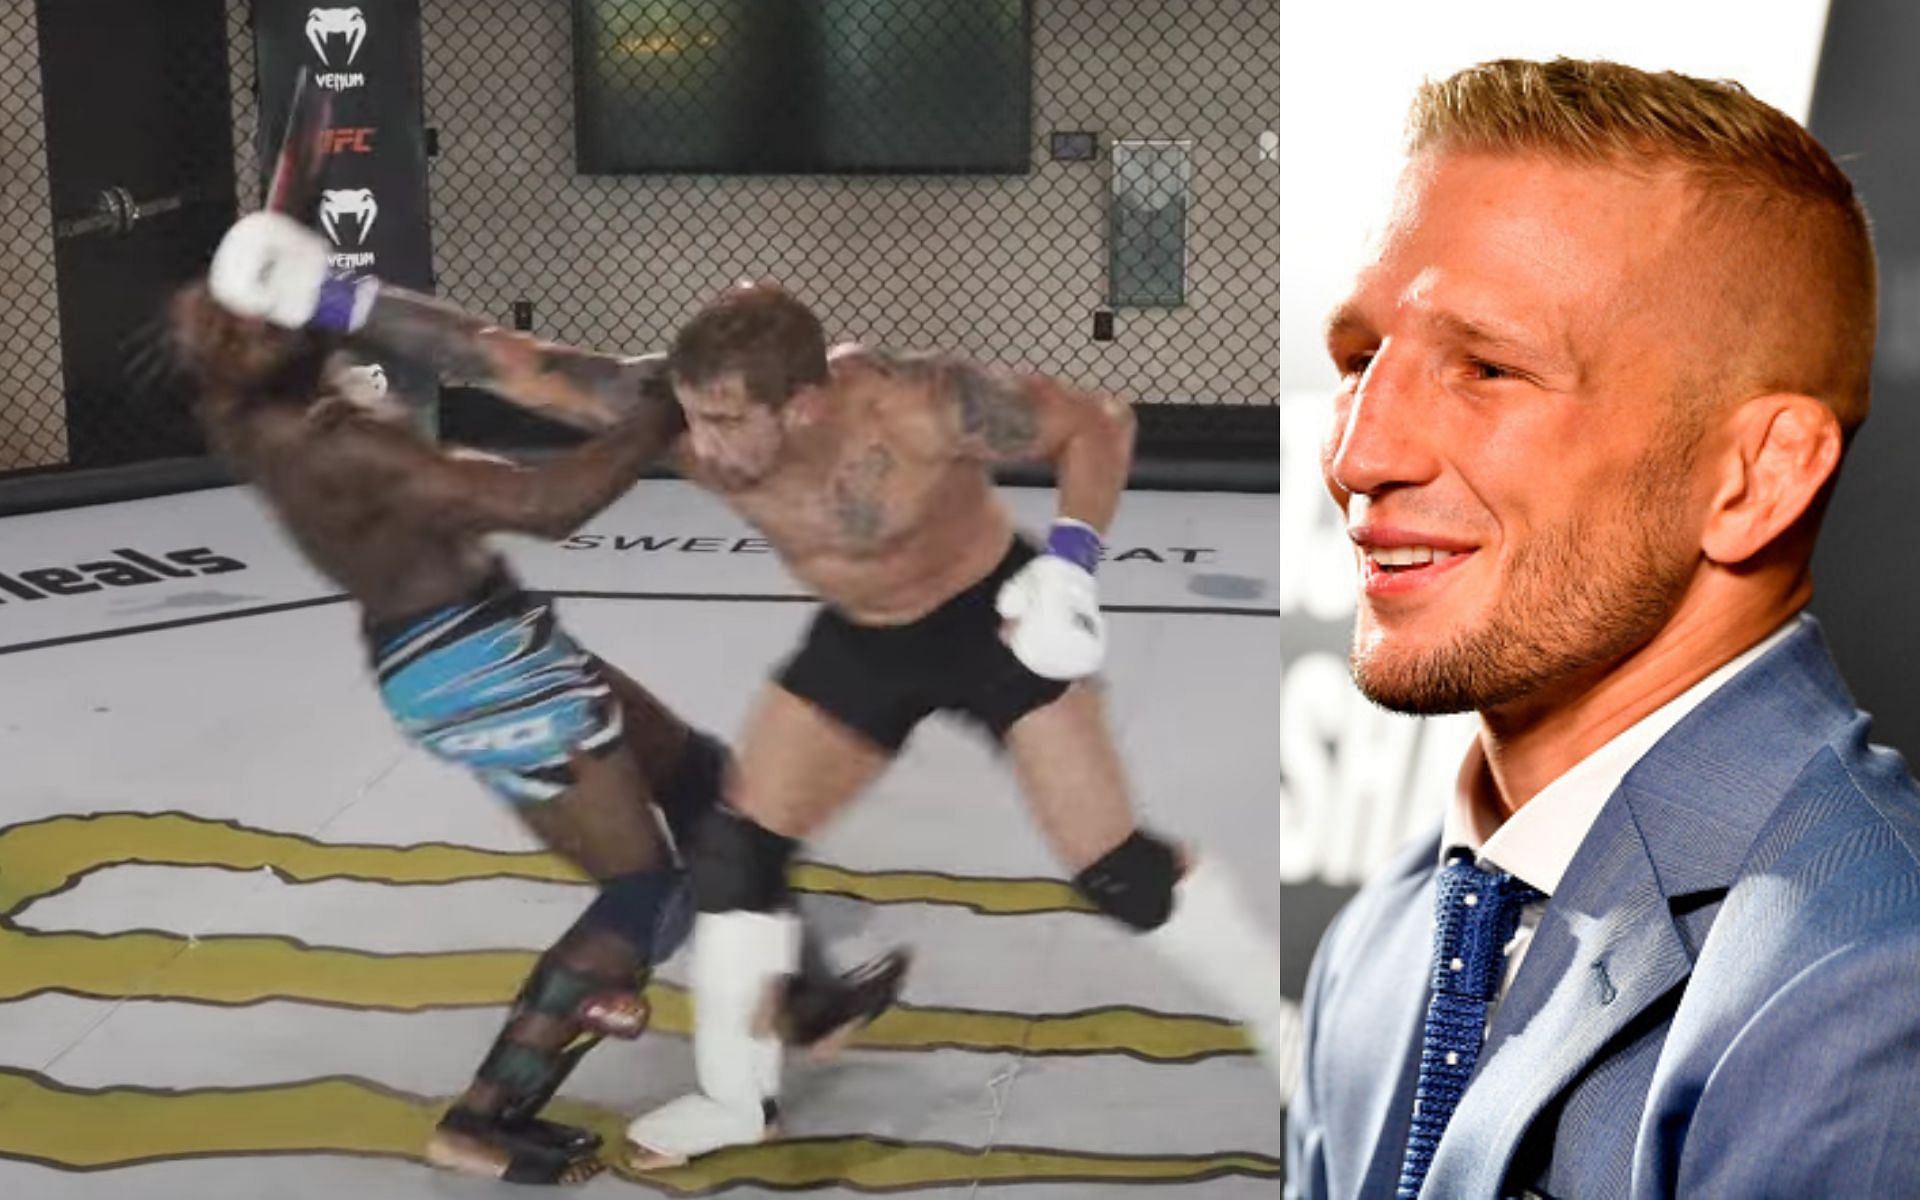 Aljamain Sterling and J.P. Buys (left. Image credit: Aljamain Sterling on YouTube), T.J. Dillashaw (right)